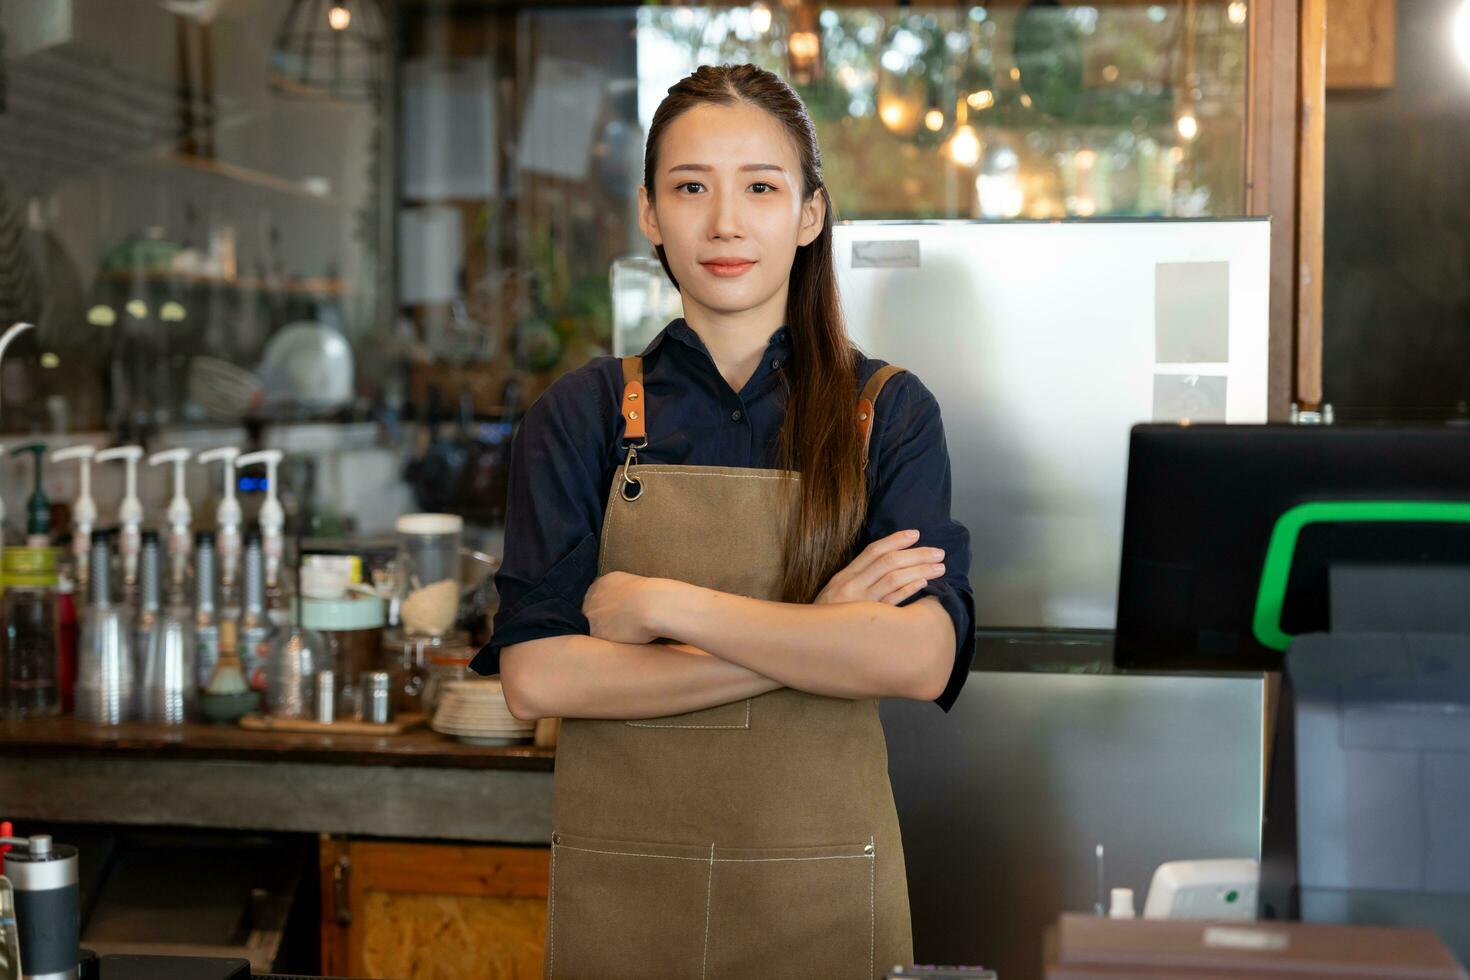 Business woman owner open on the first day of business. guarantees safety, cleanliness, open the coffee shop. open for New normal. Small business, welcome, restaurant, home made photo